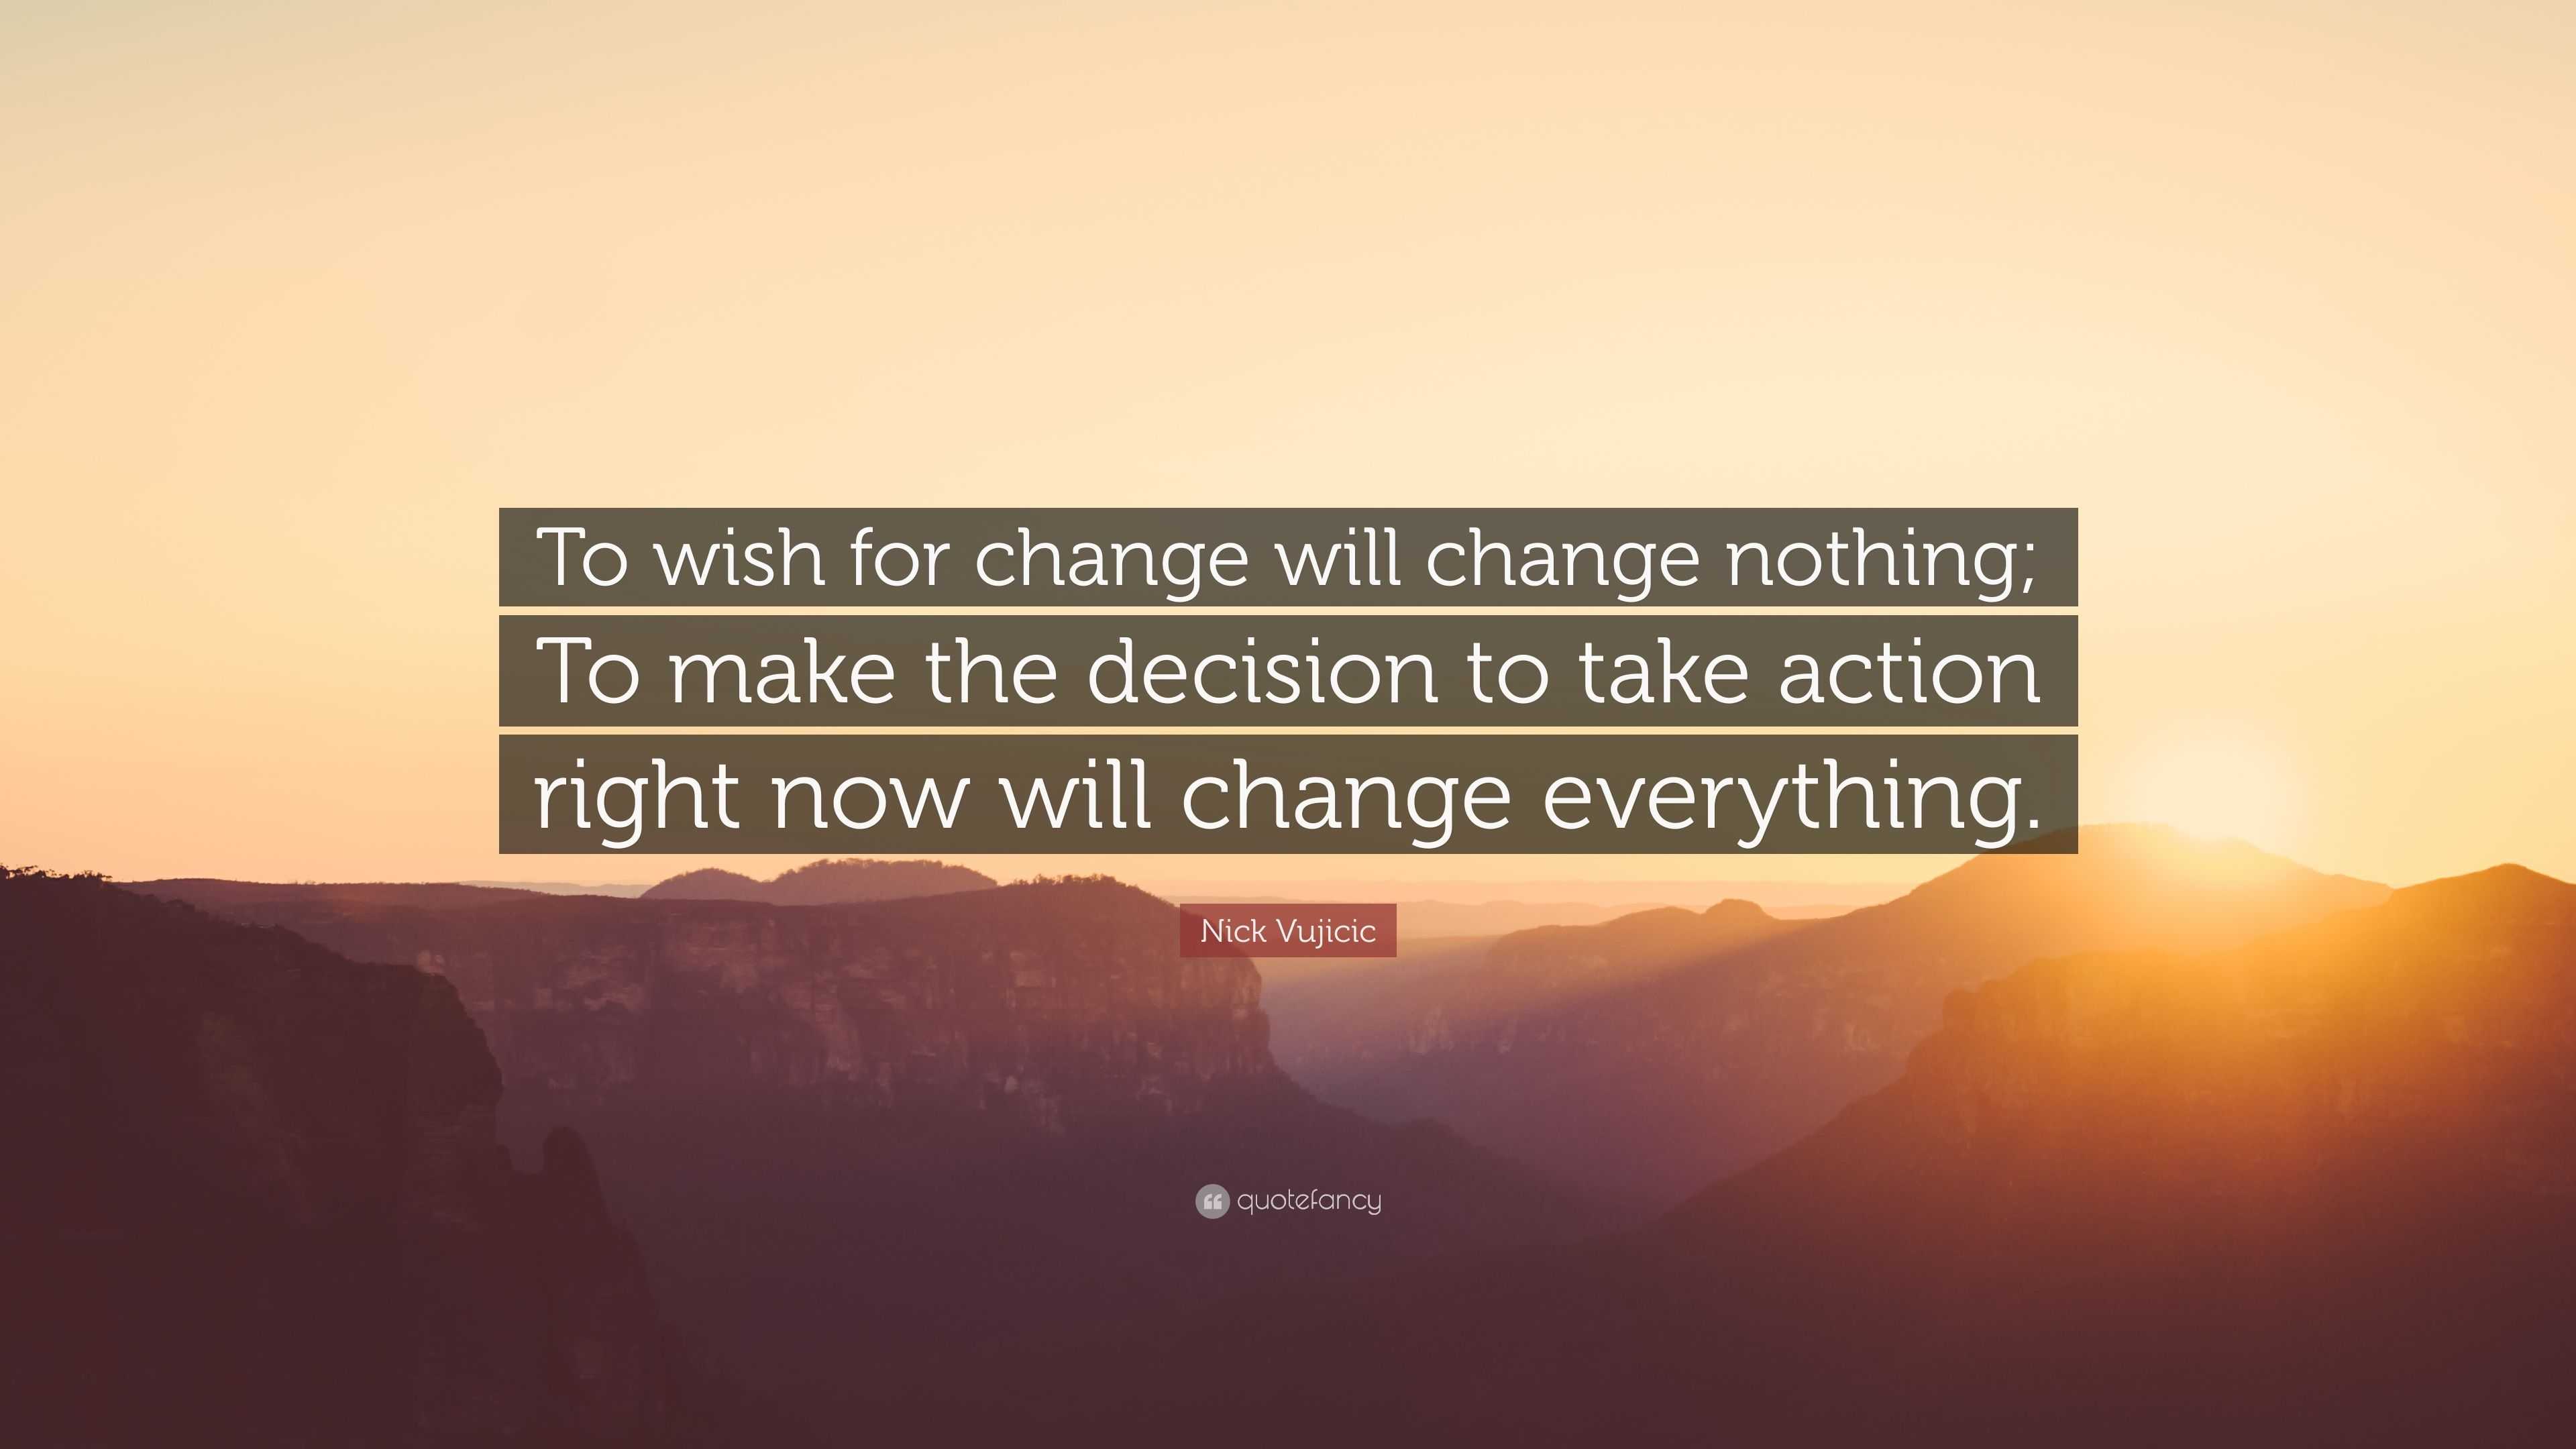 Nick Vujicic Quote: “To wish for change will change nothing; To make ...